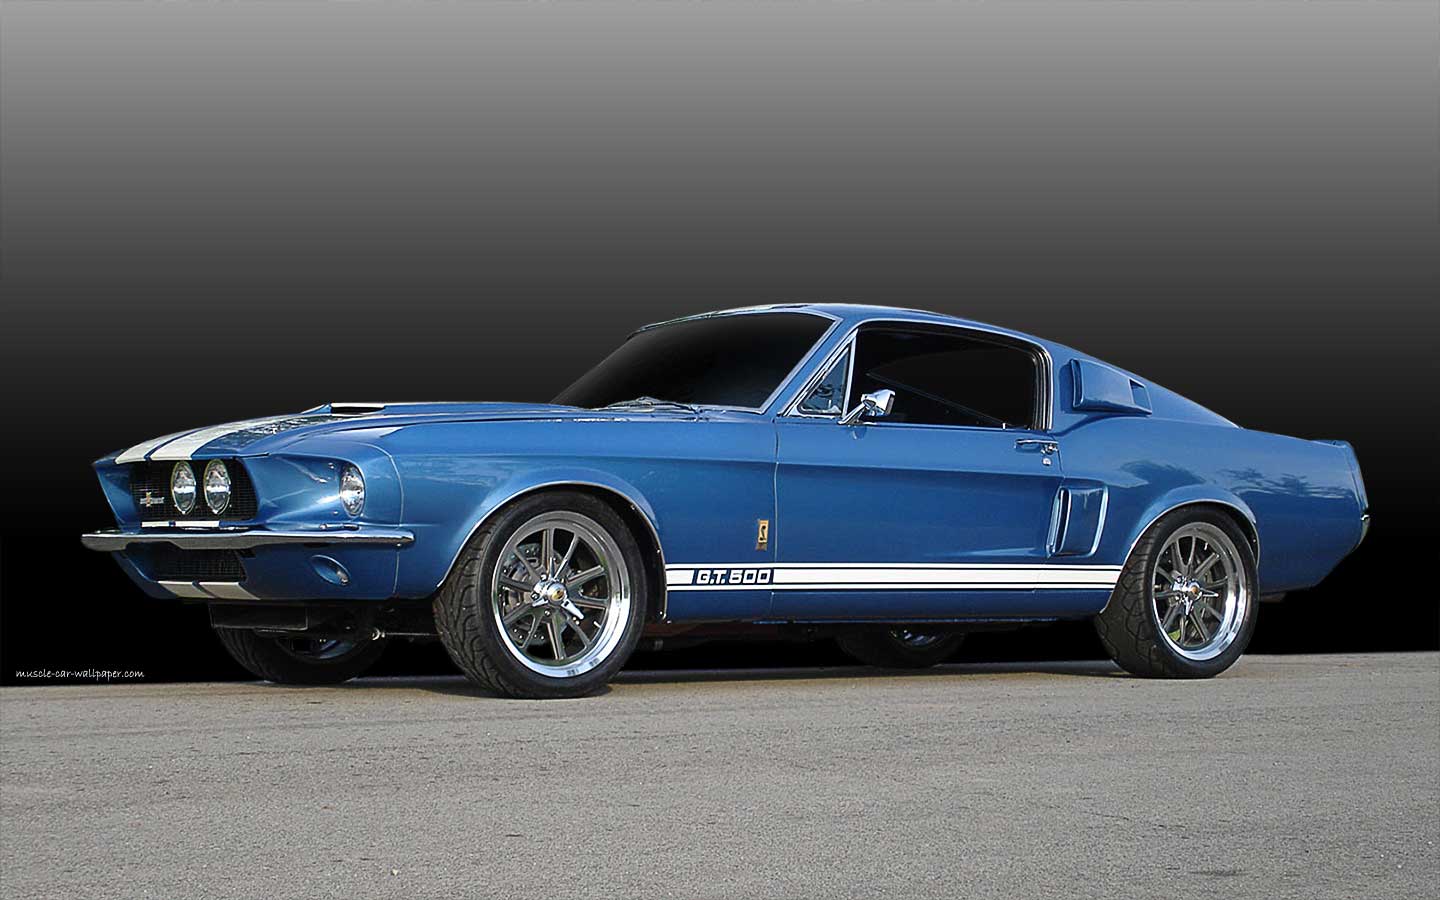 Ford Mustang Shelby Gt500 Muscle Car Wallpaper